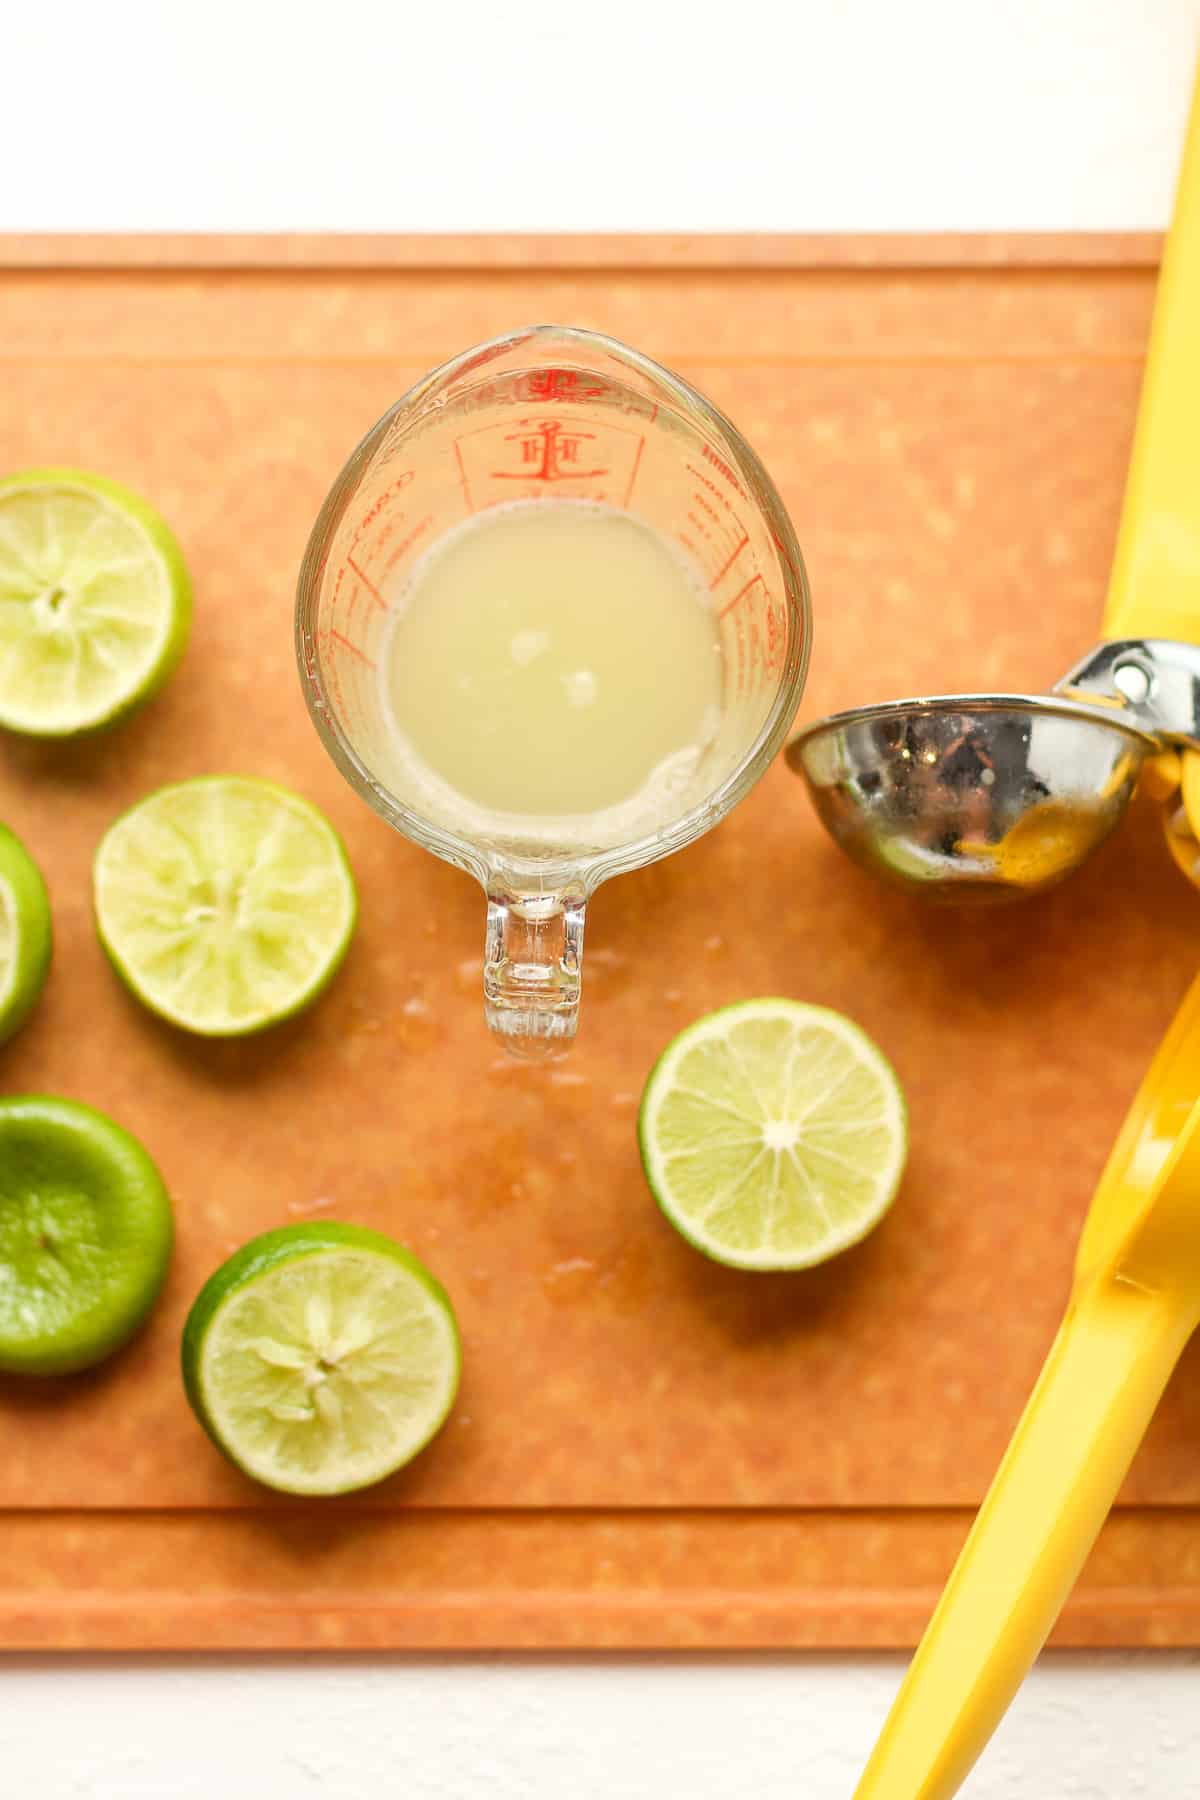 A cutting board with lime halves and a measuring cup of lime juice.